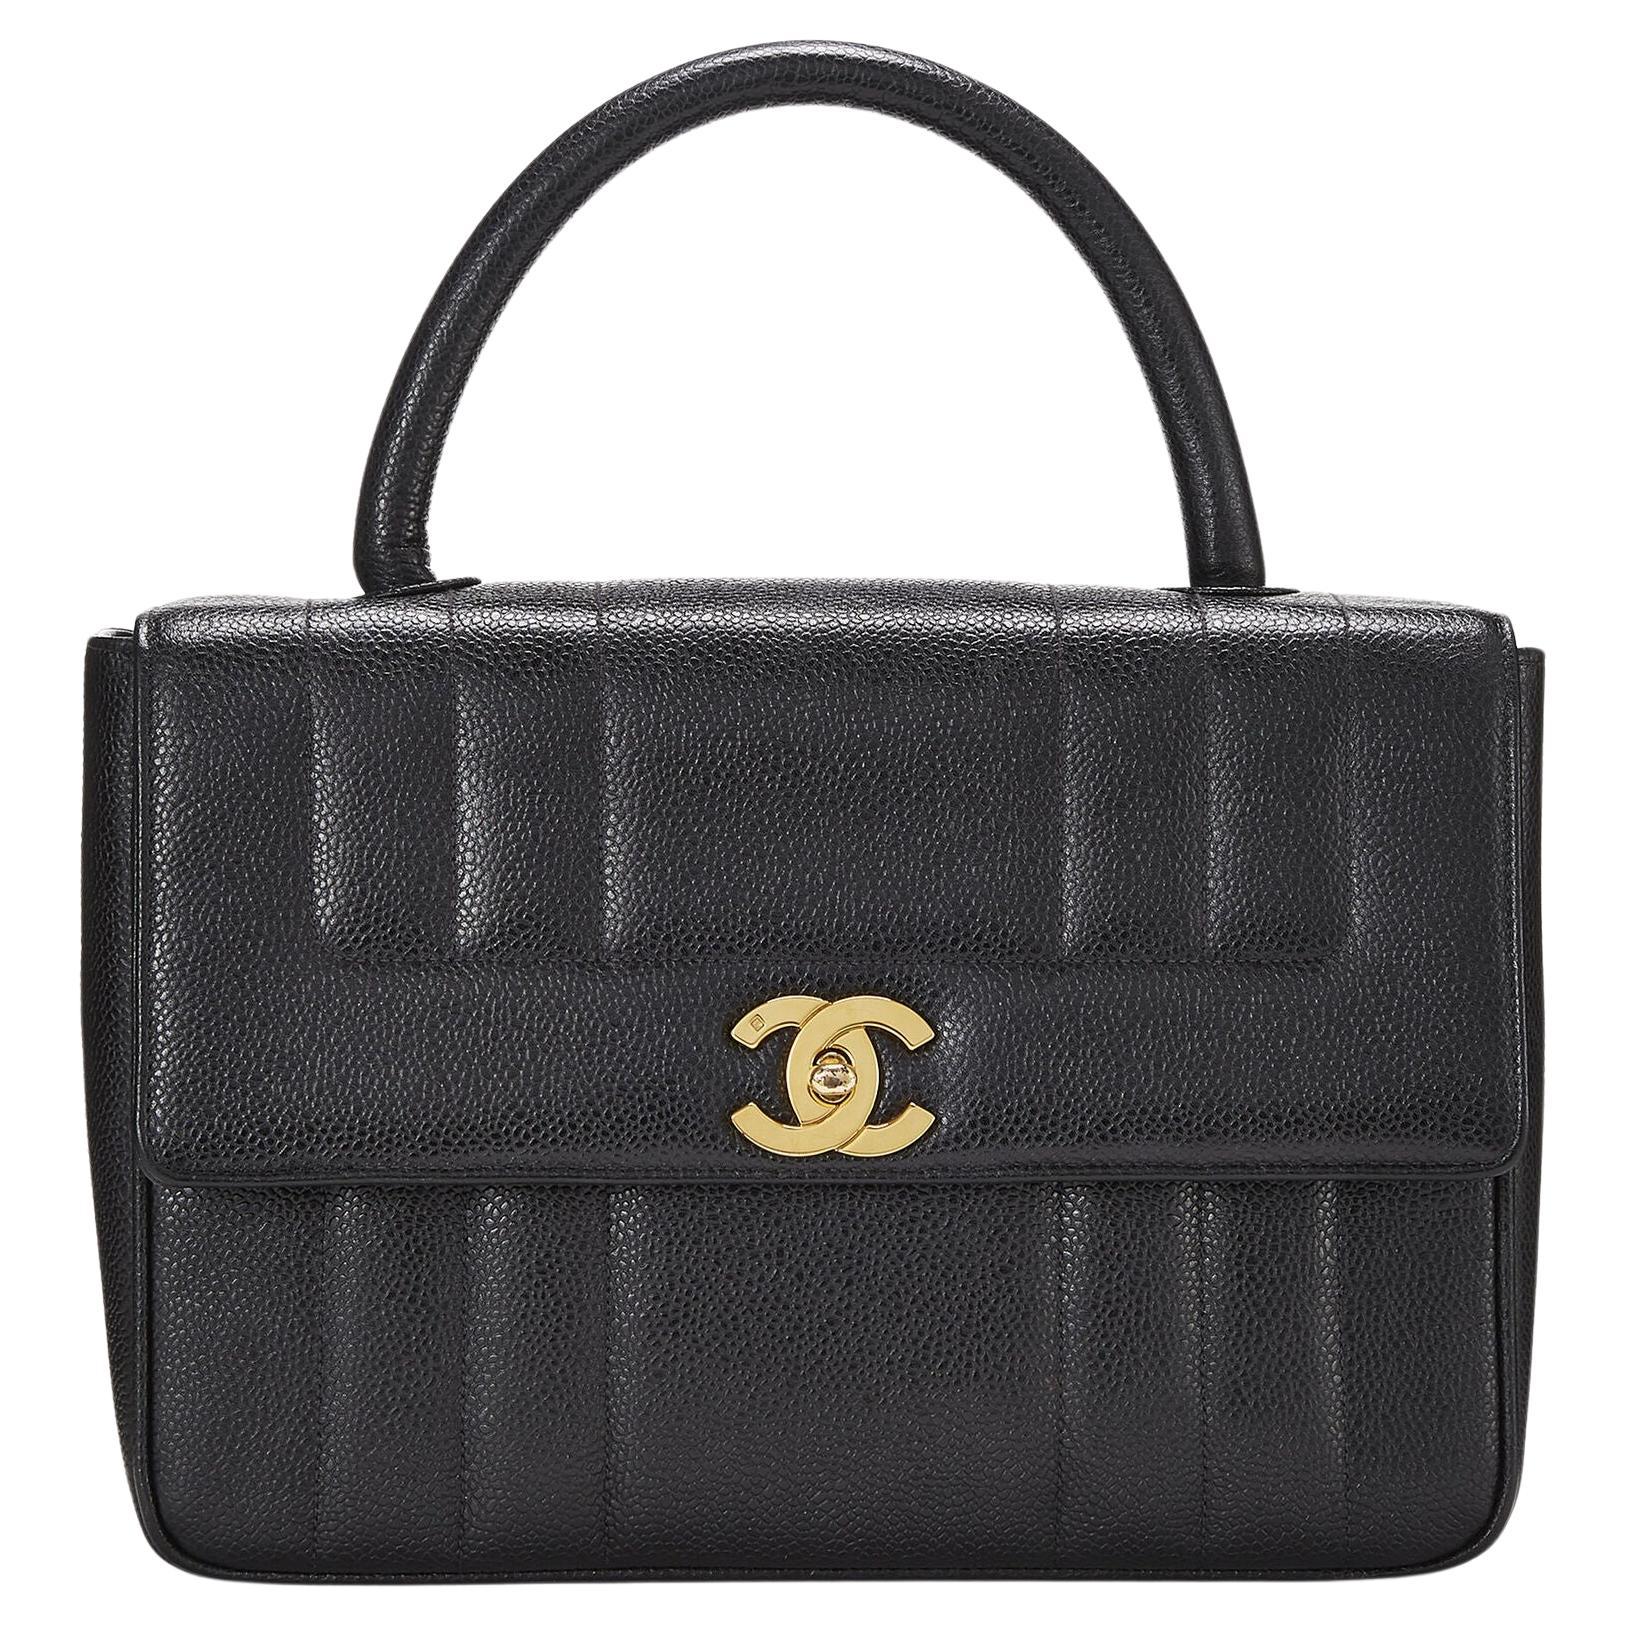 Chanel 1994 Vintage Rare Black Caviar Top Handle Classic Kelly Flap Bag In Good Condition For Sale In Miami, FL